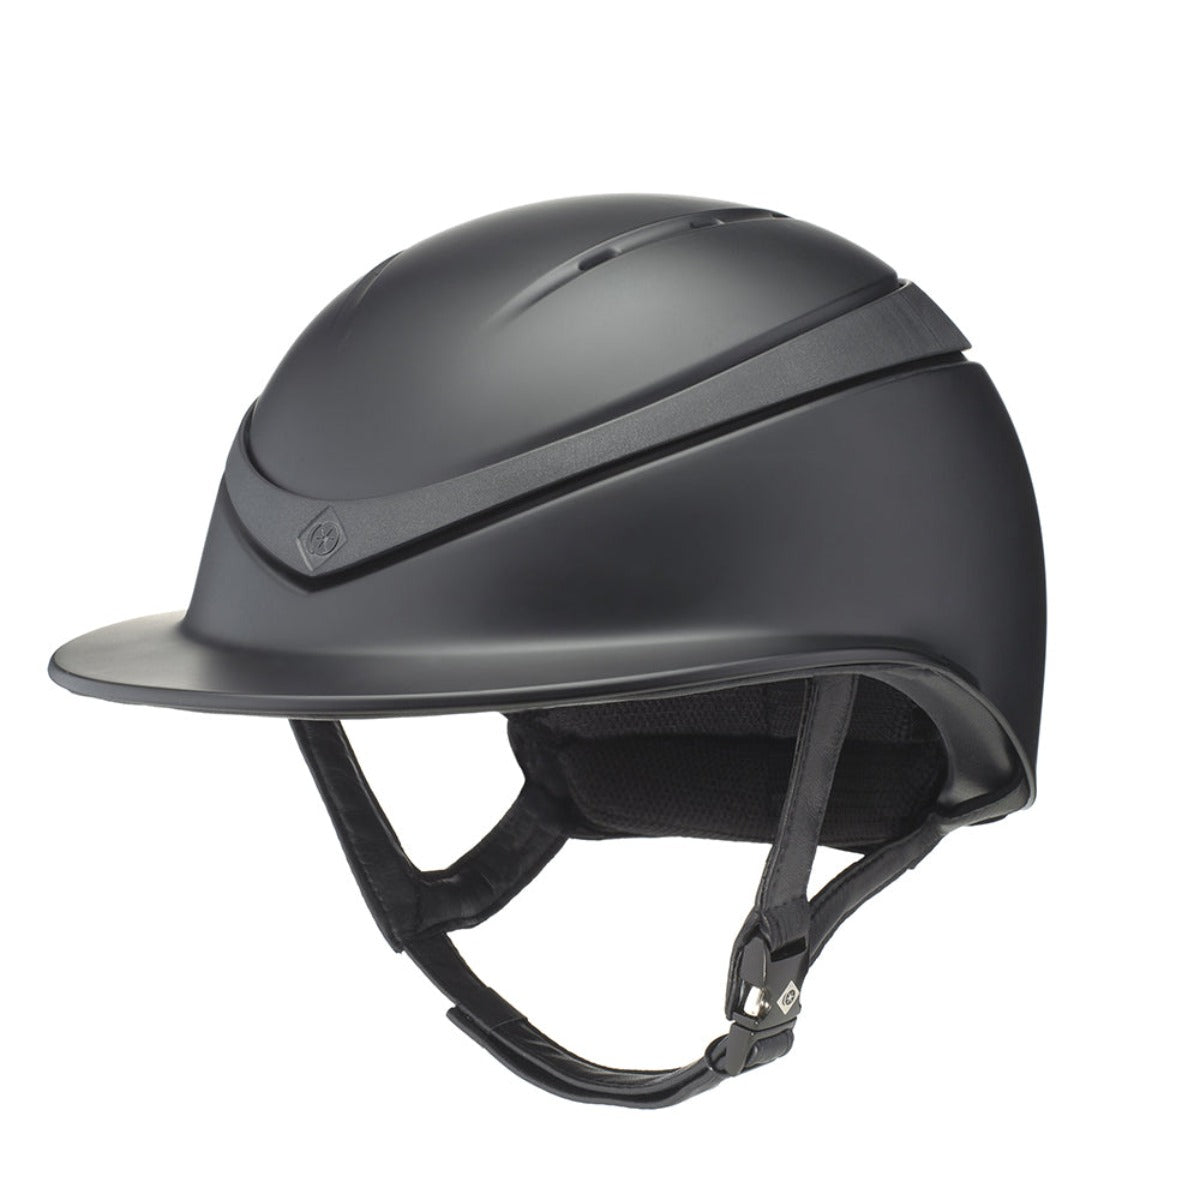 Charles Owen Halo Luxe Helmet With MIPS